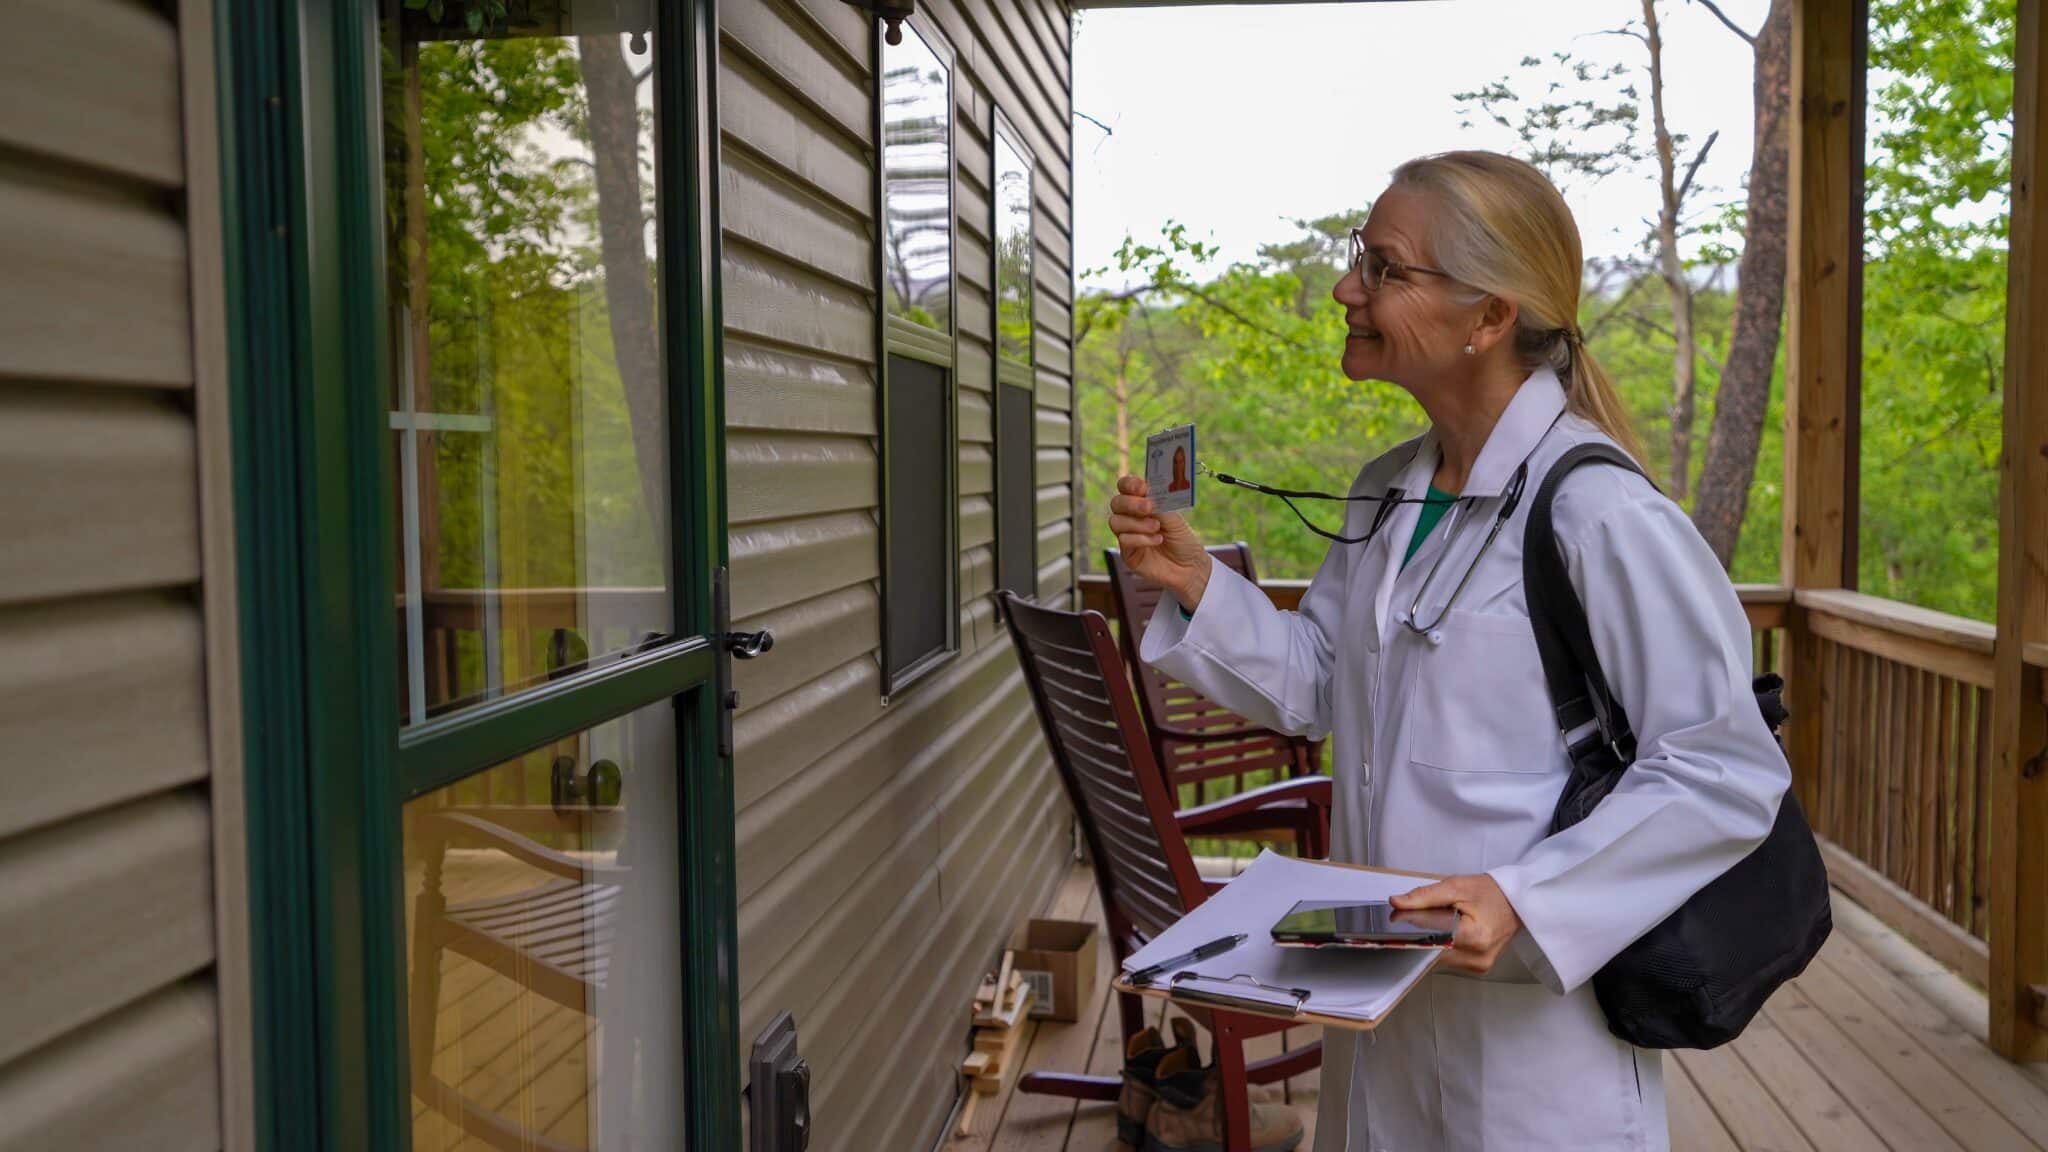 A traveling physician arrives for a home visit. She will dictate the patient notes in her iPhone.